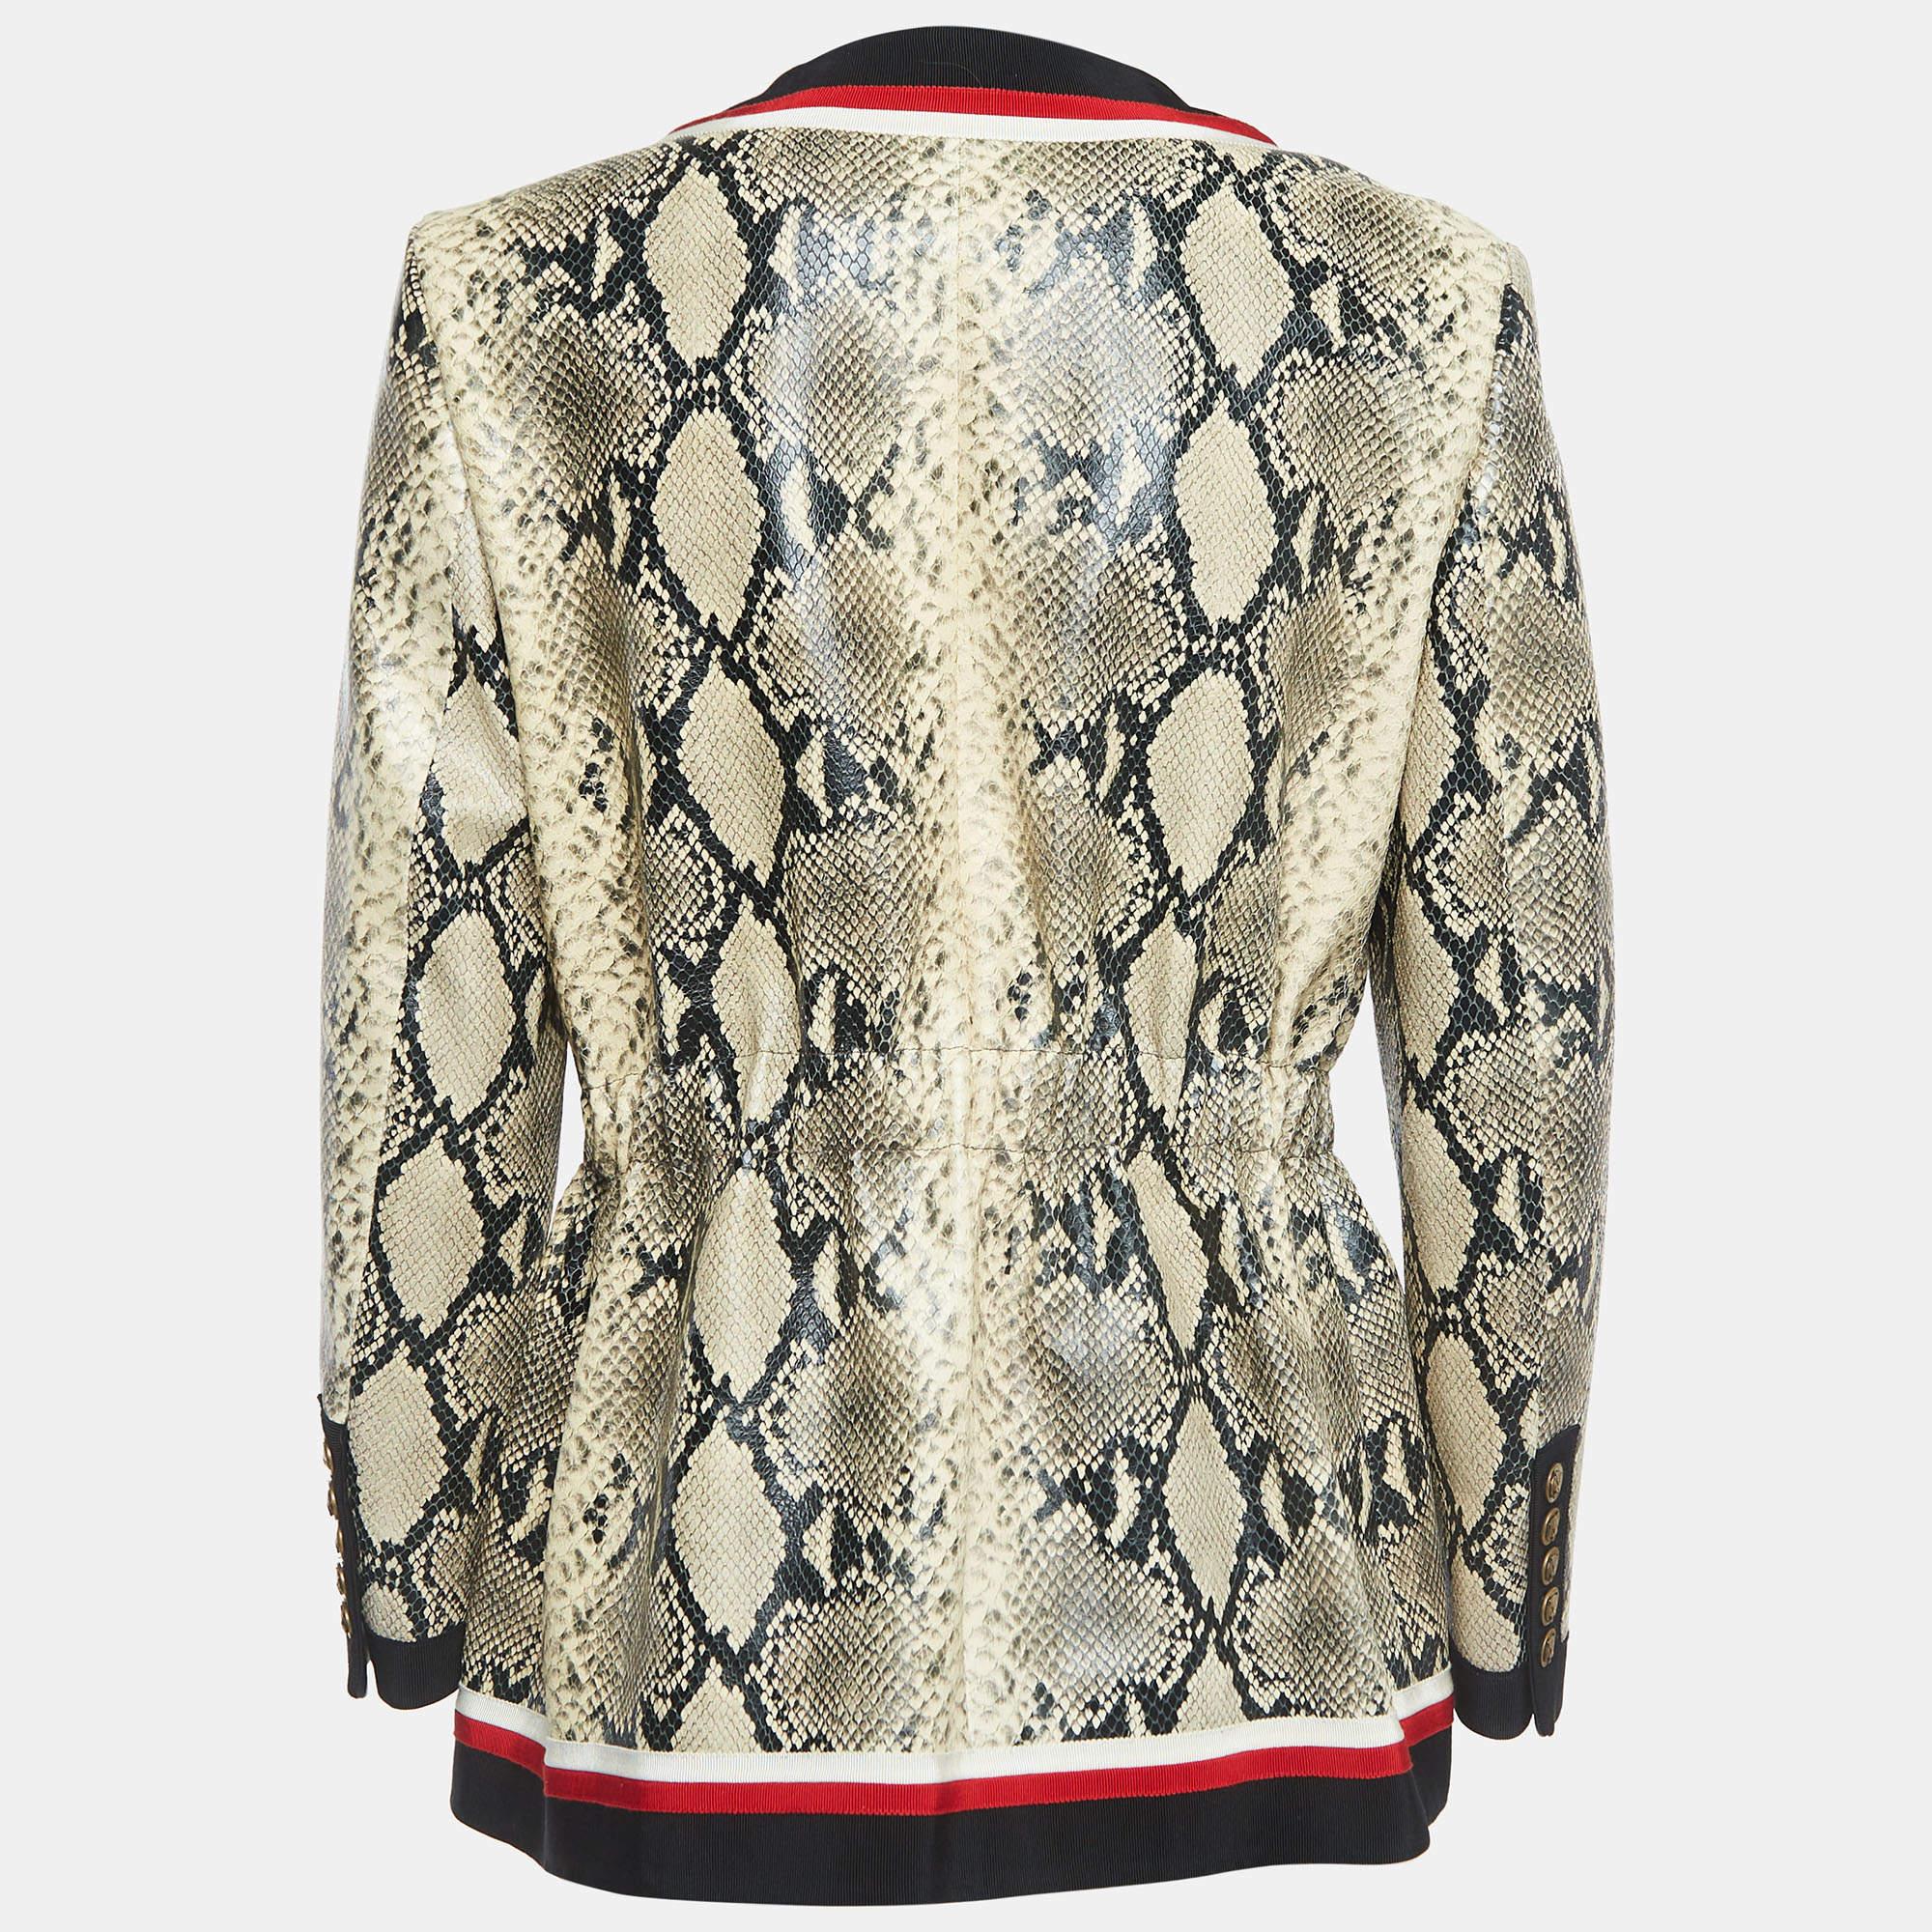 Infuse an extra dose of style into your outfit with this highly fashionable Gucci jacket. Tailored from quality materials, it embodies a classy vibe and is filled with functional characteristics.

